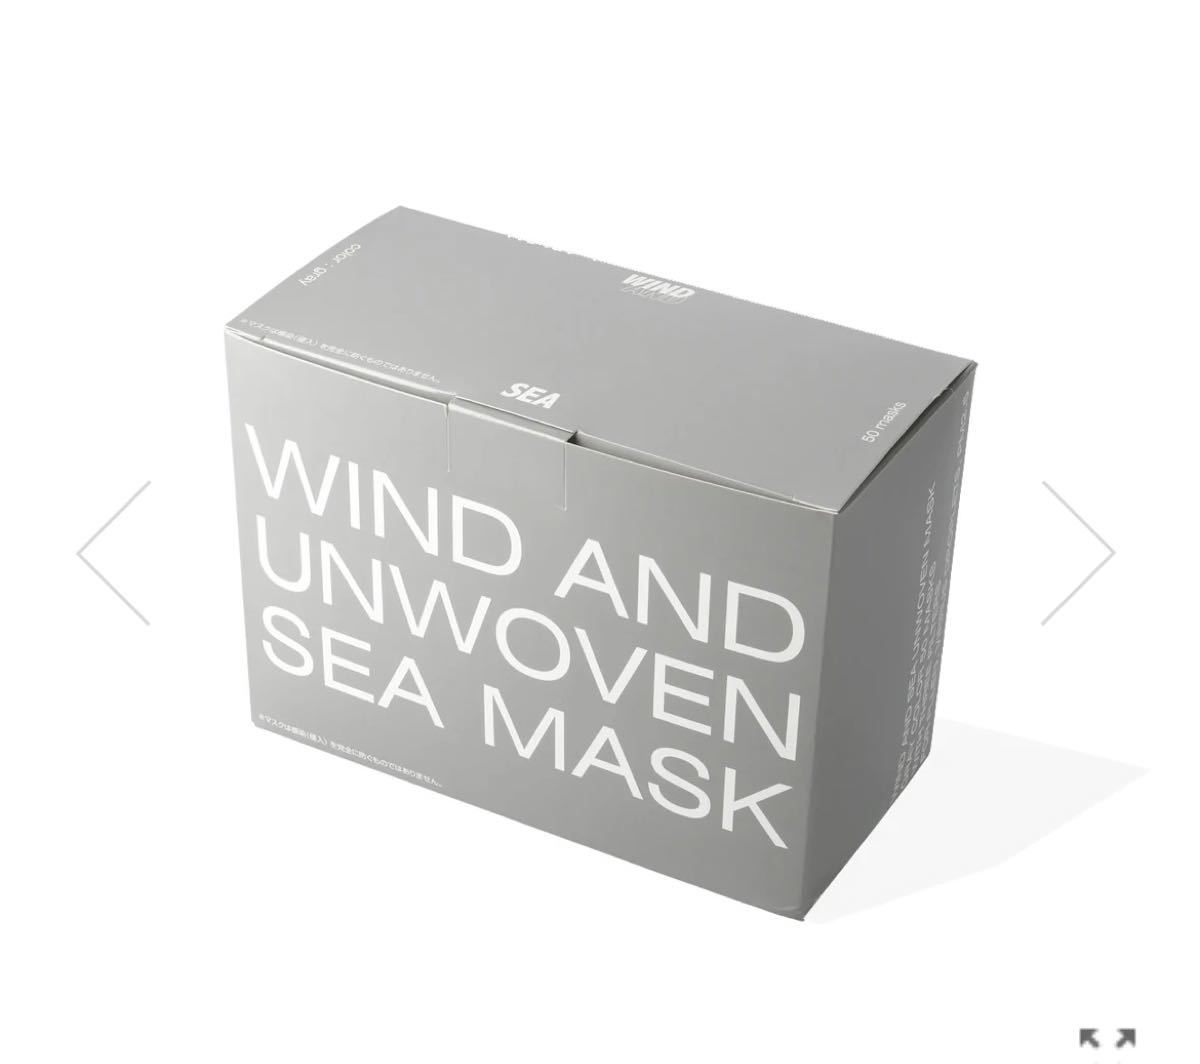 WIND AND UNWOVEN MASK wind and sea マスク｜Yahoo!フリマ（旧PayPay